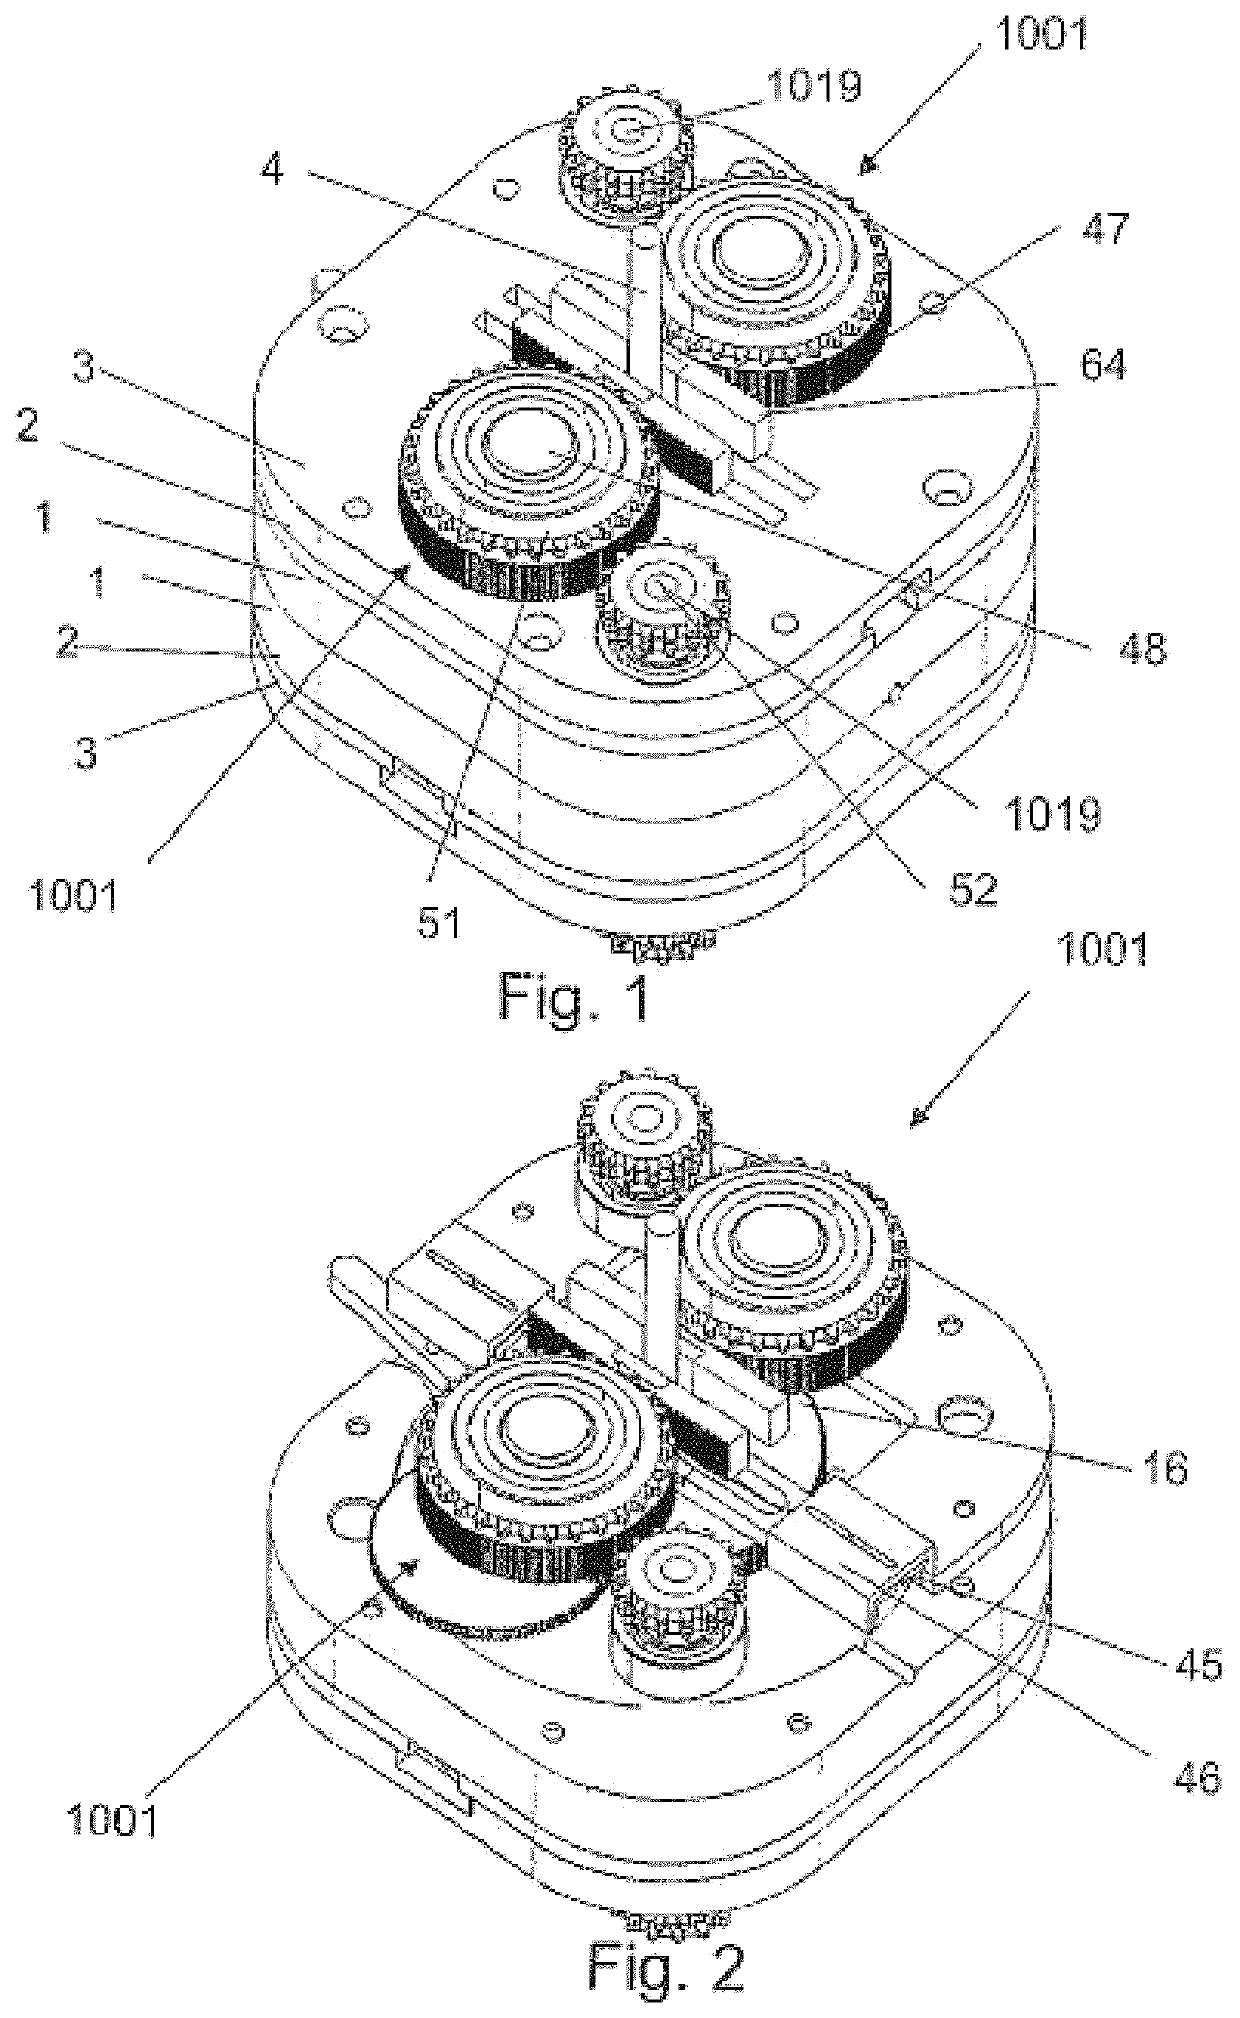 Continuously variable transmission with uniform input-to-output ratio that is non-dependent on friction